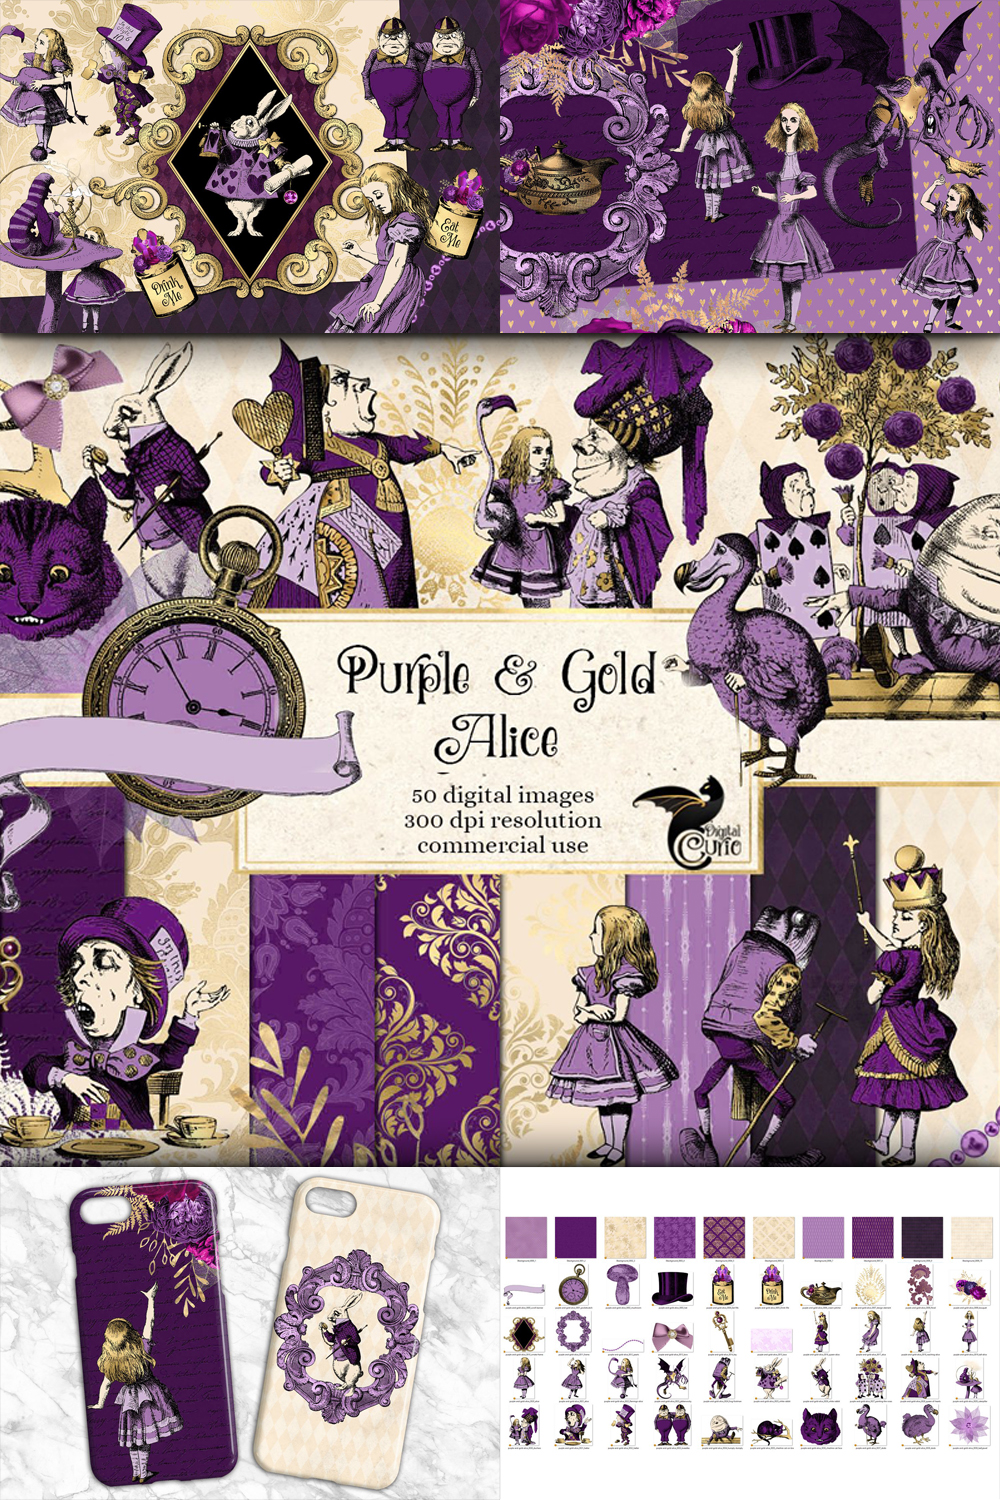 Purple and gold alice in wonderland graphics of pinterest.